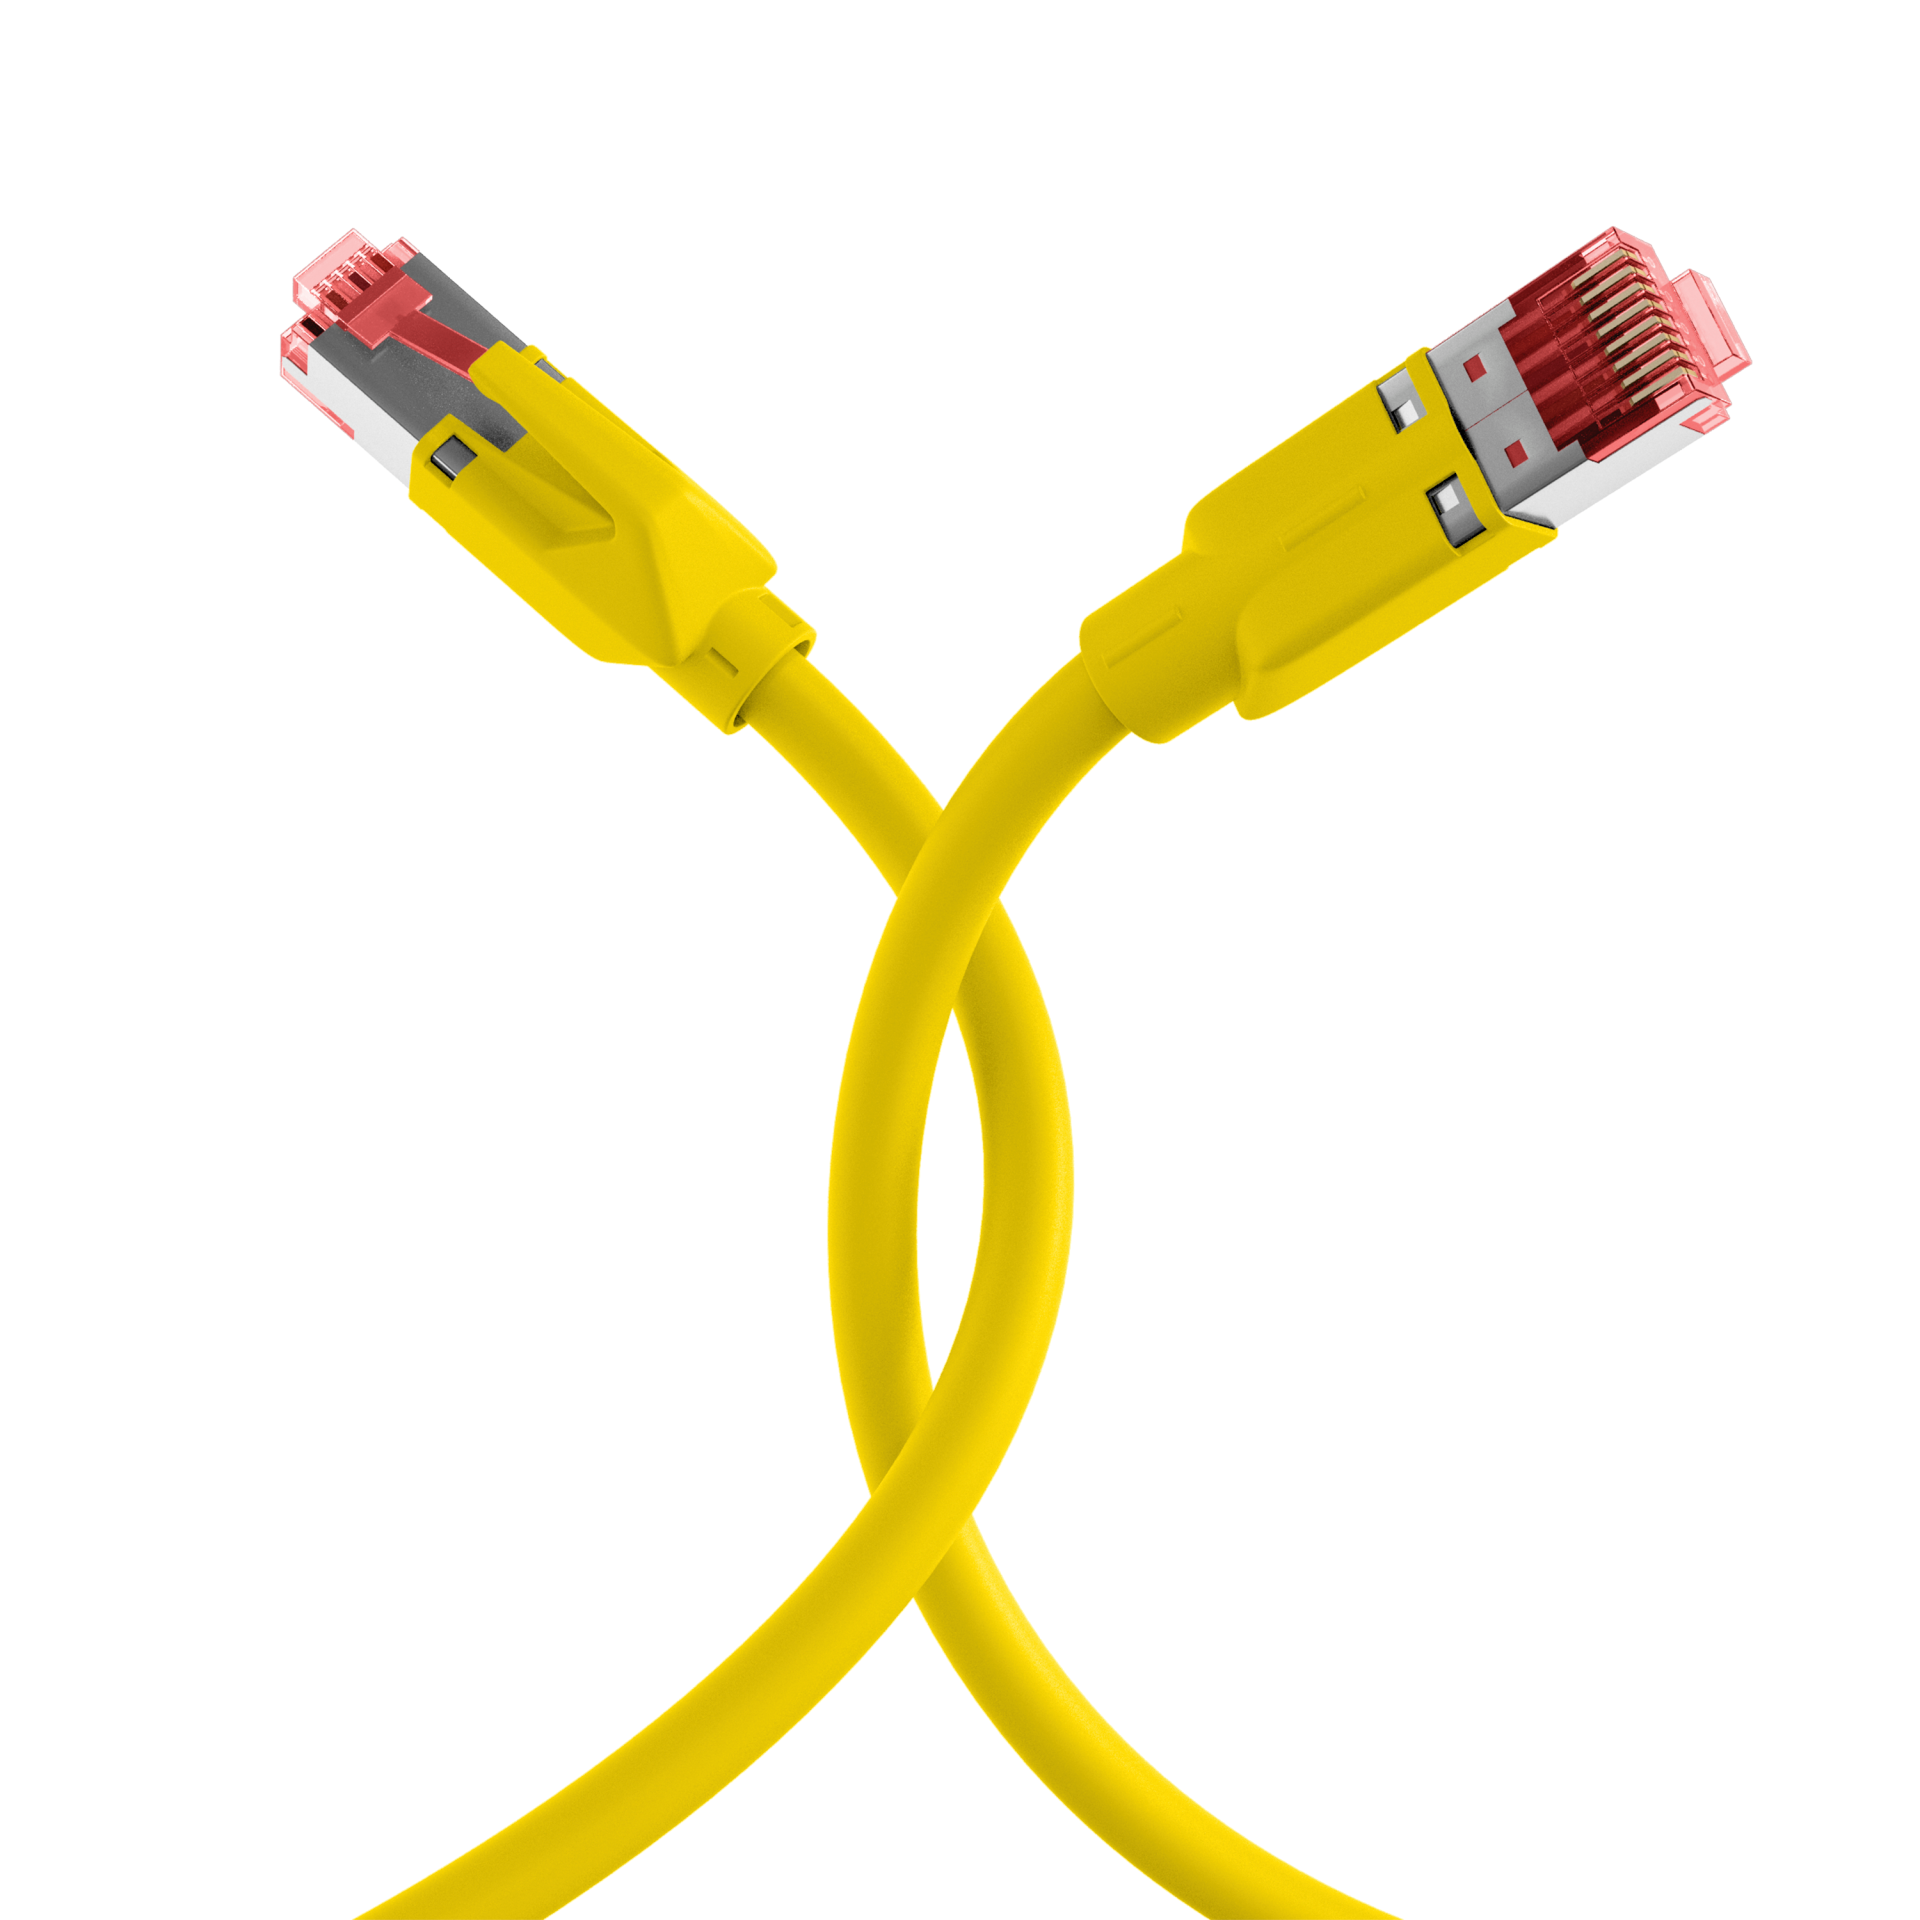 RJ45 Patch Cord Cat.5e SF/UTP PURTM21 for drag chains yellow 5m